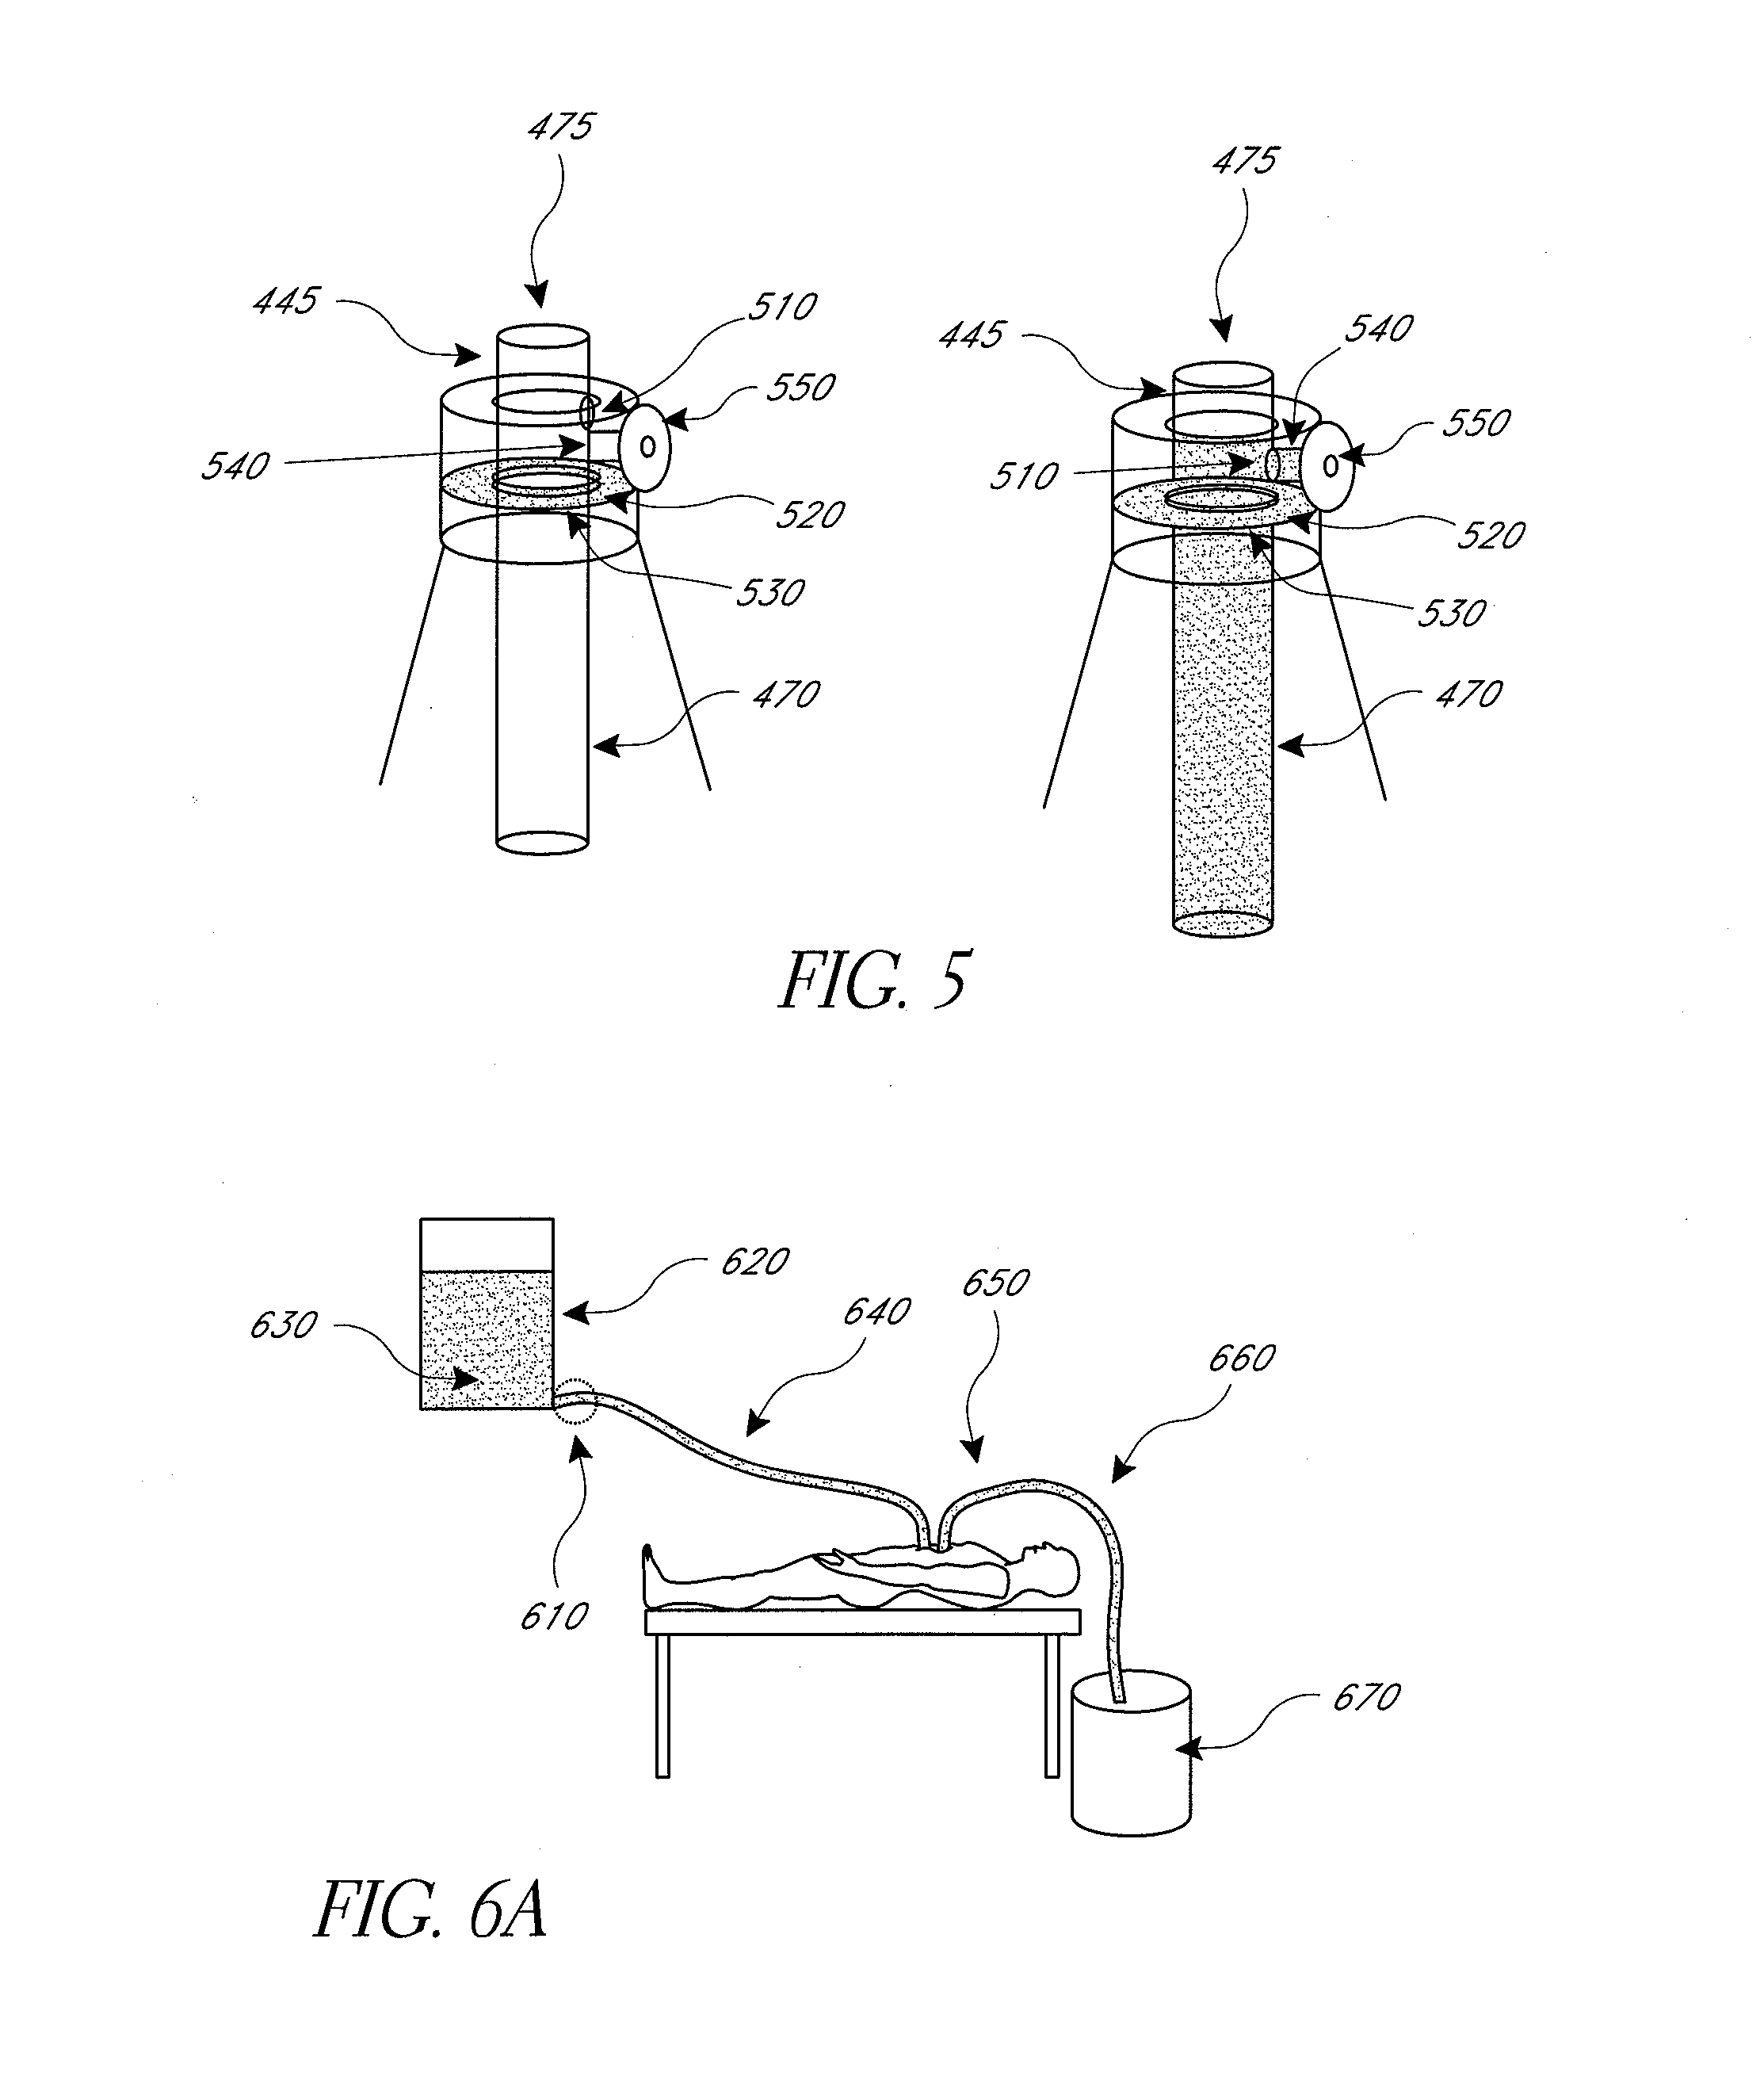 Hemostatic compositions, devices, and methods